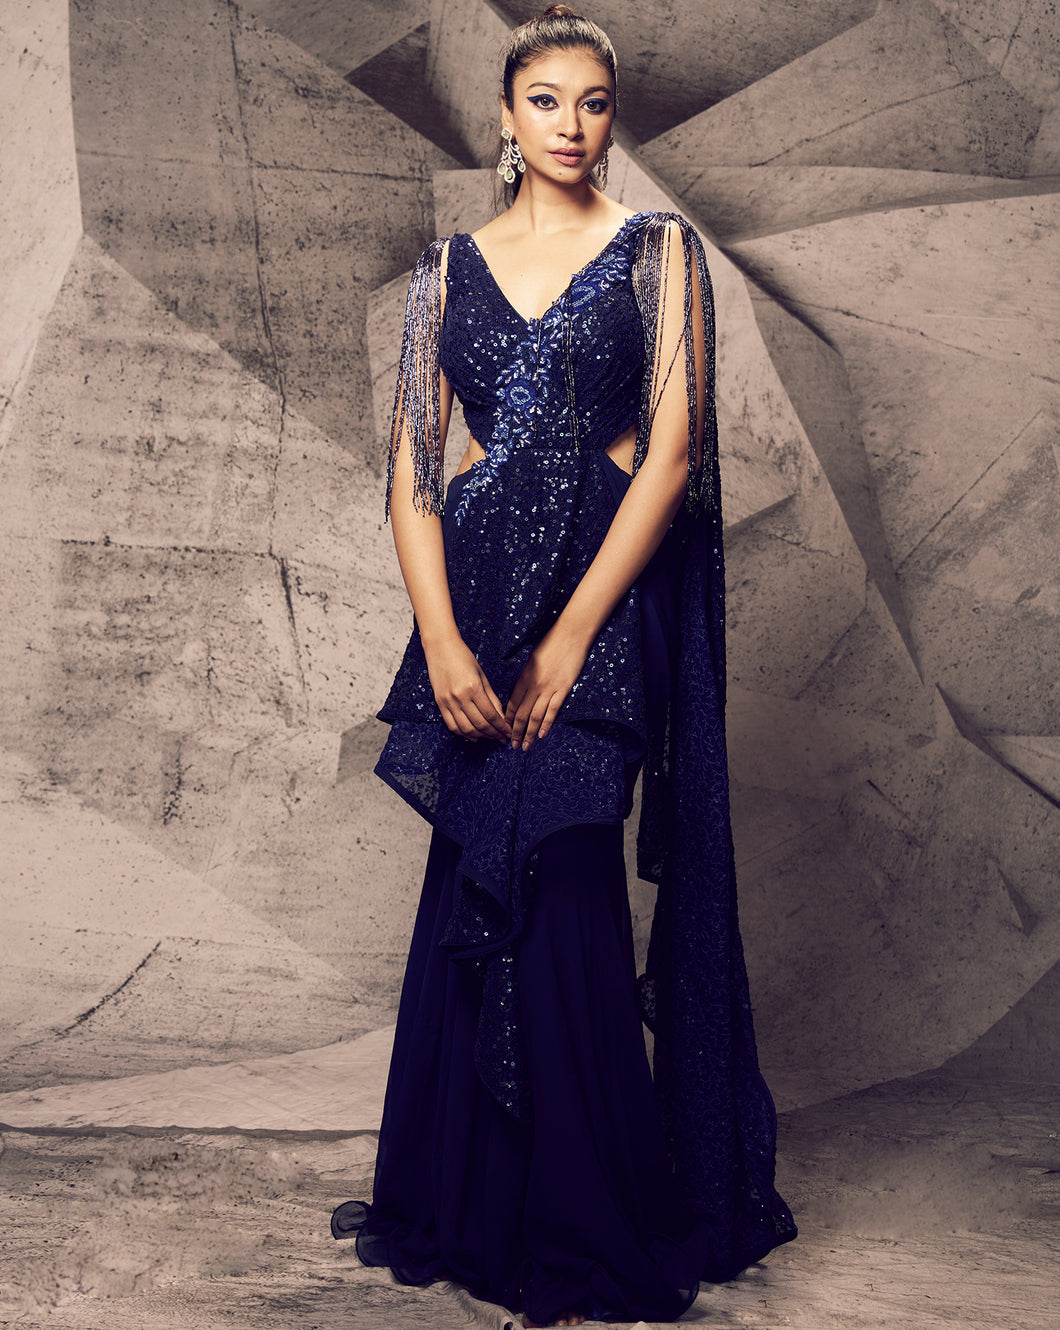 The Shimmering Blue Gown Sari